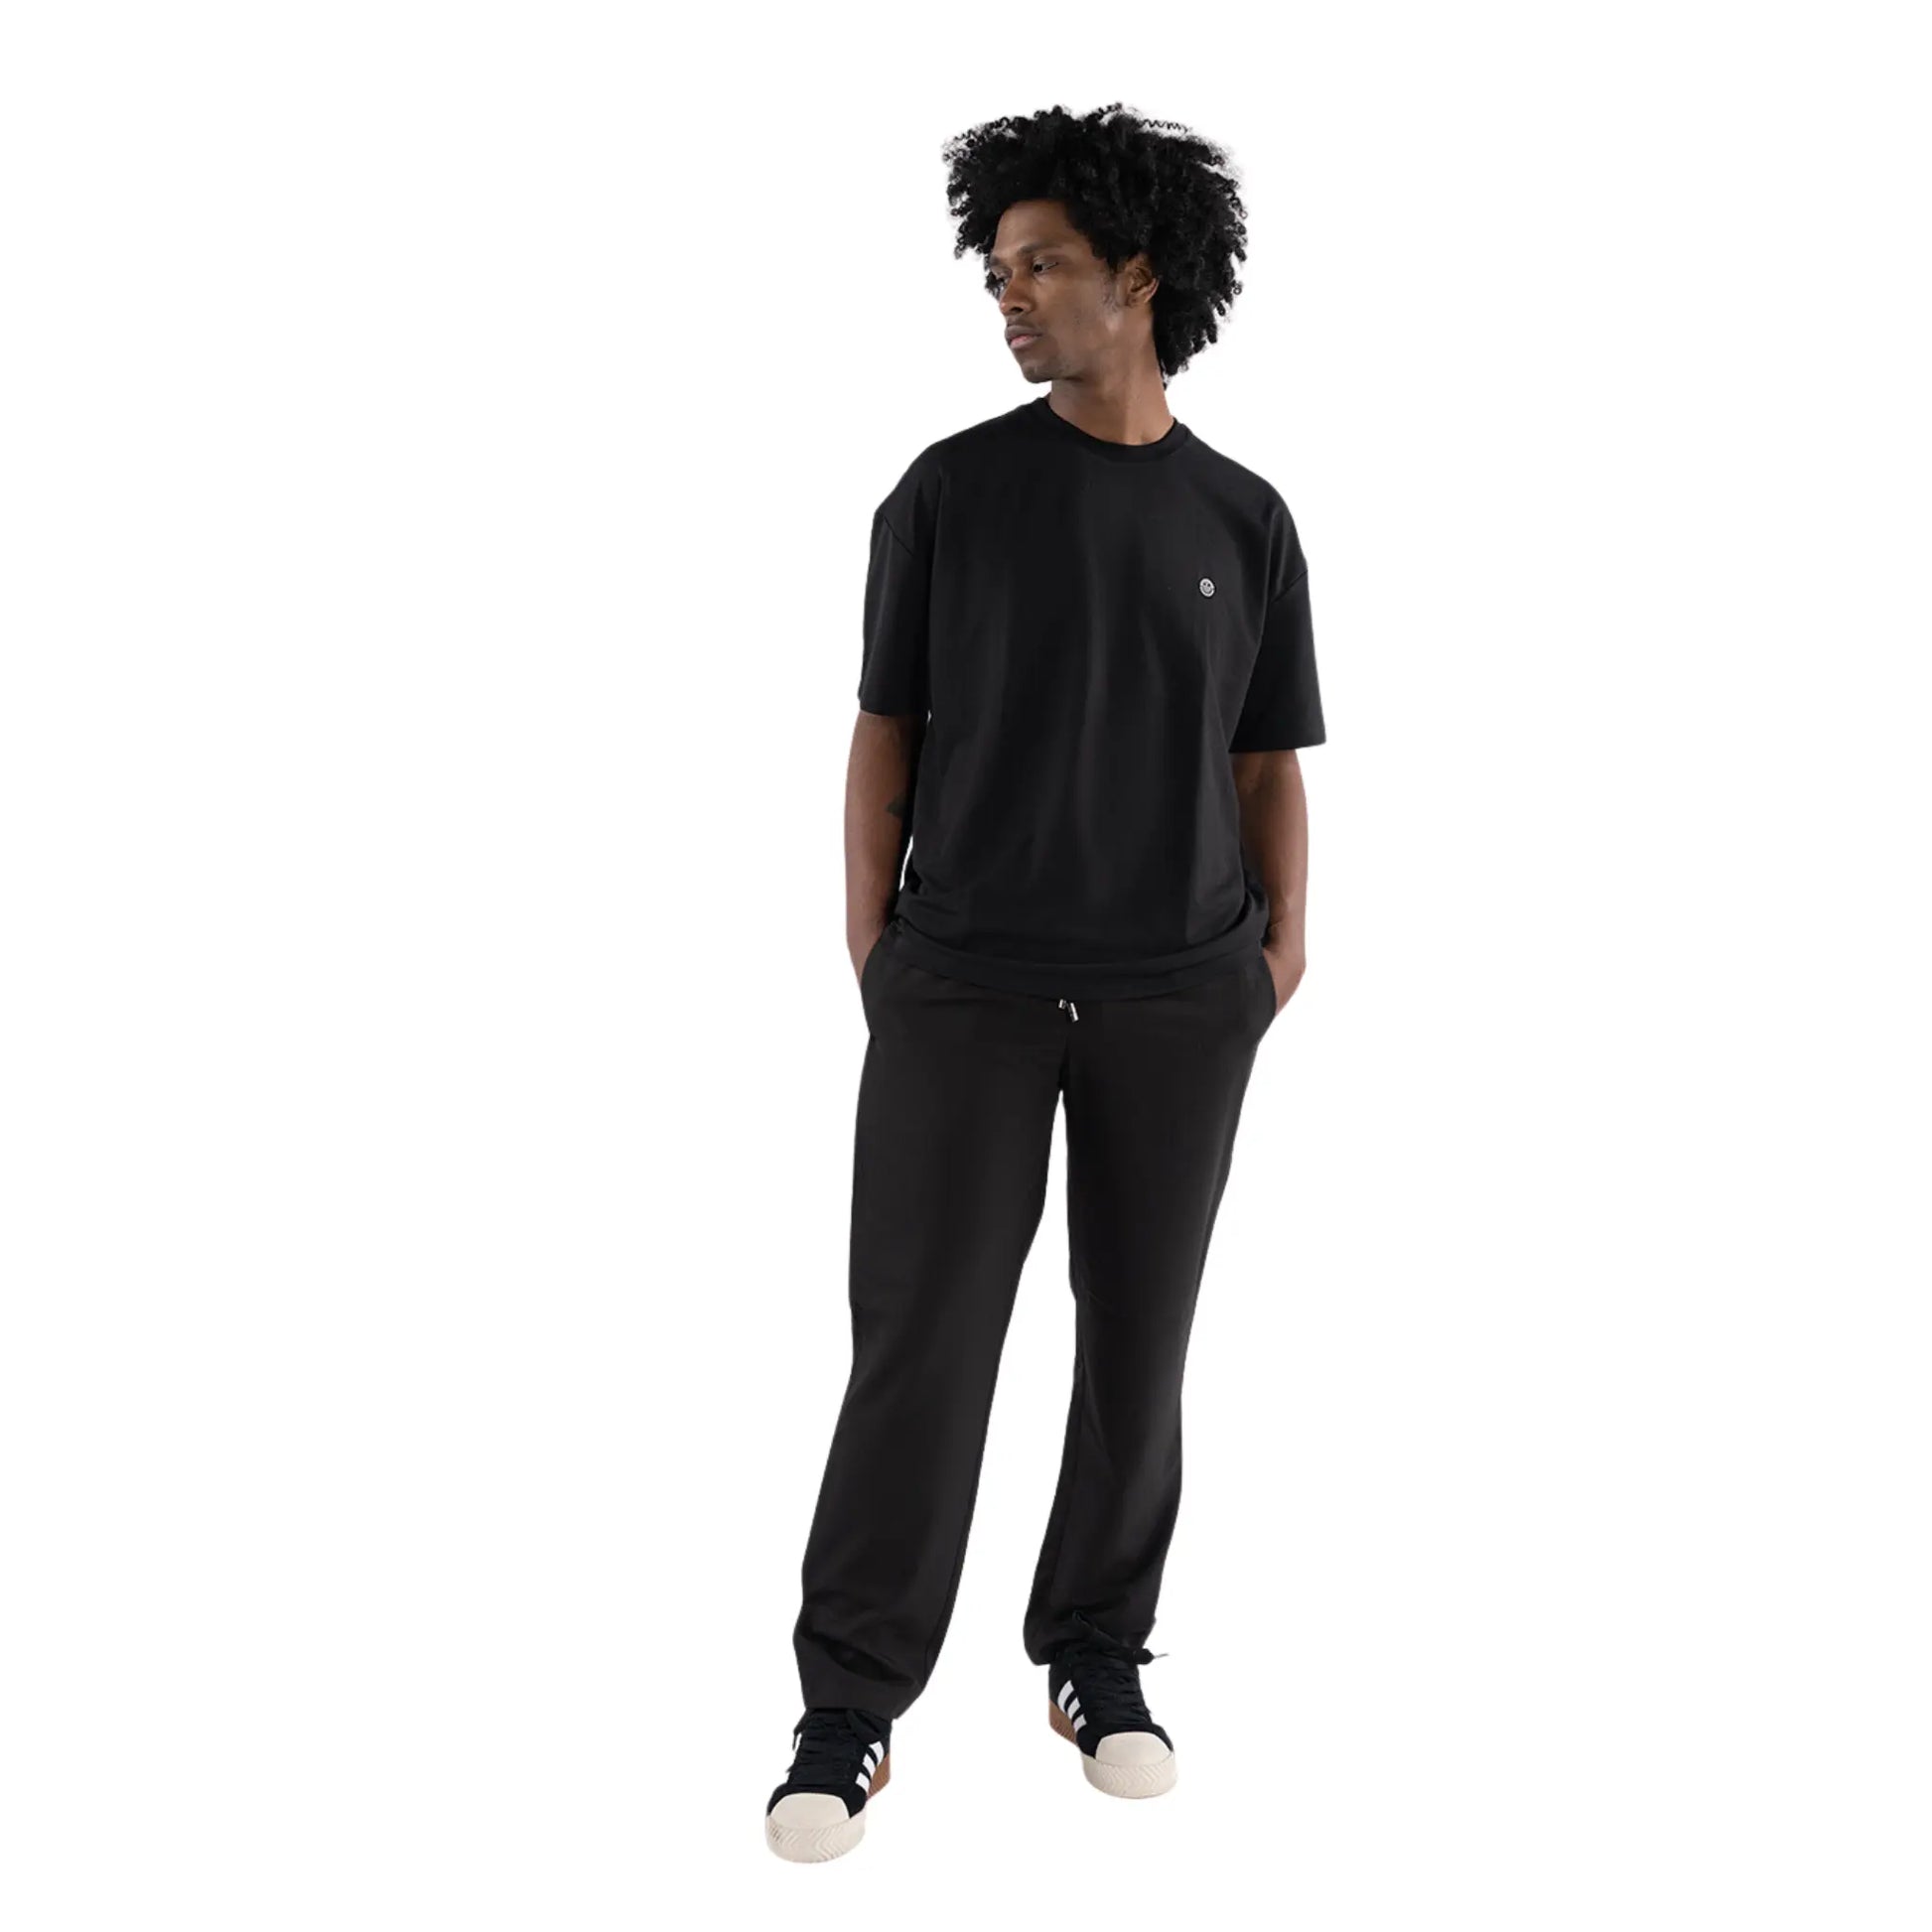 Oversized T-shirt Black worn by black man front view